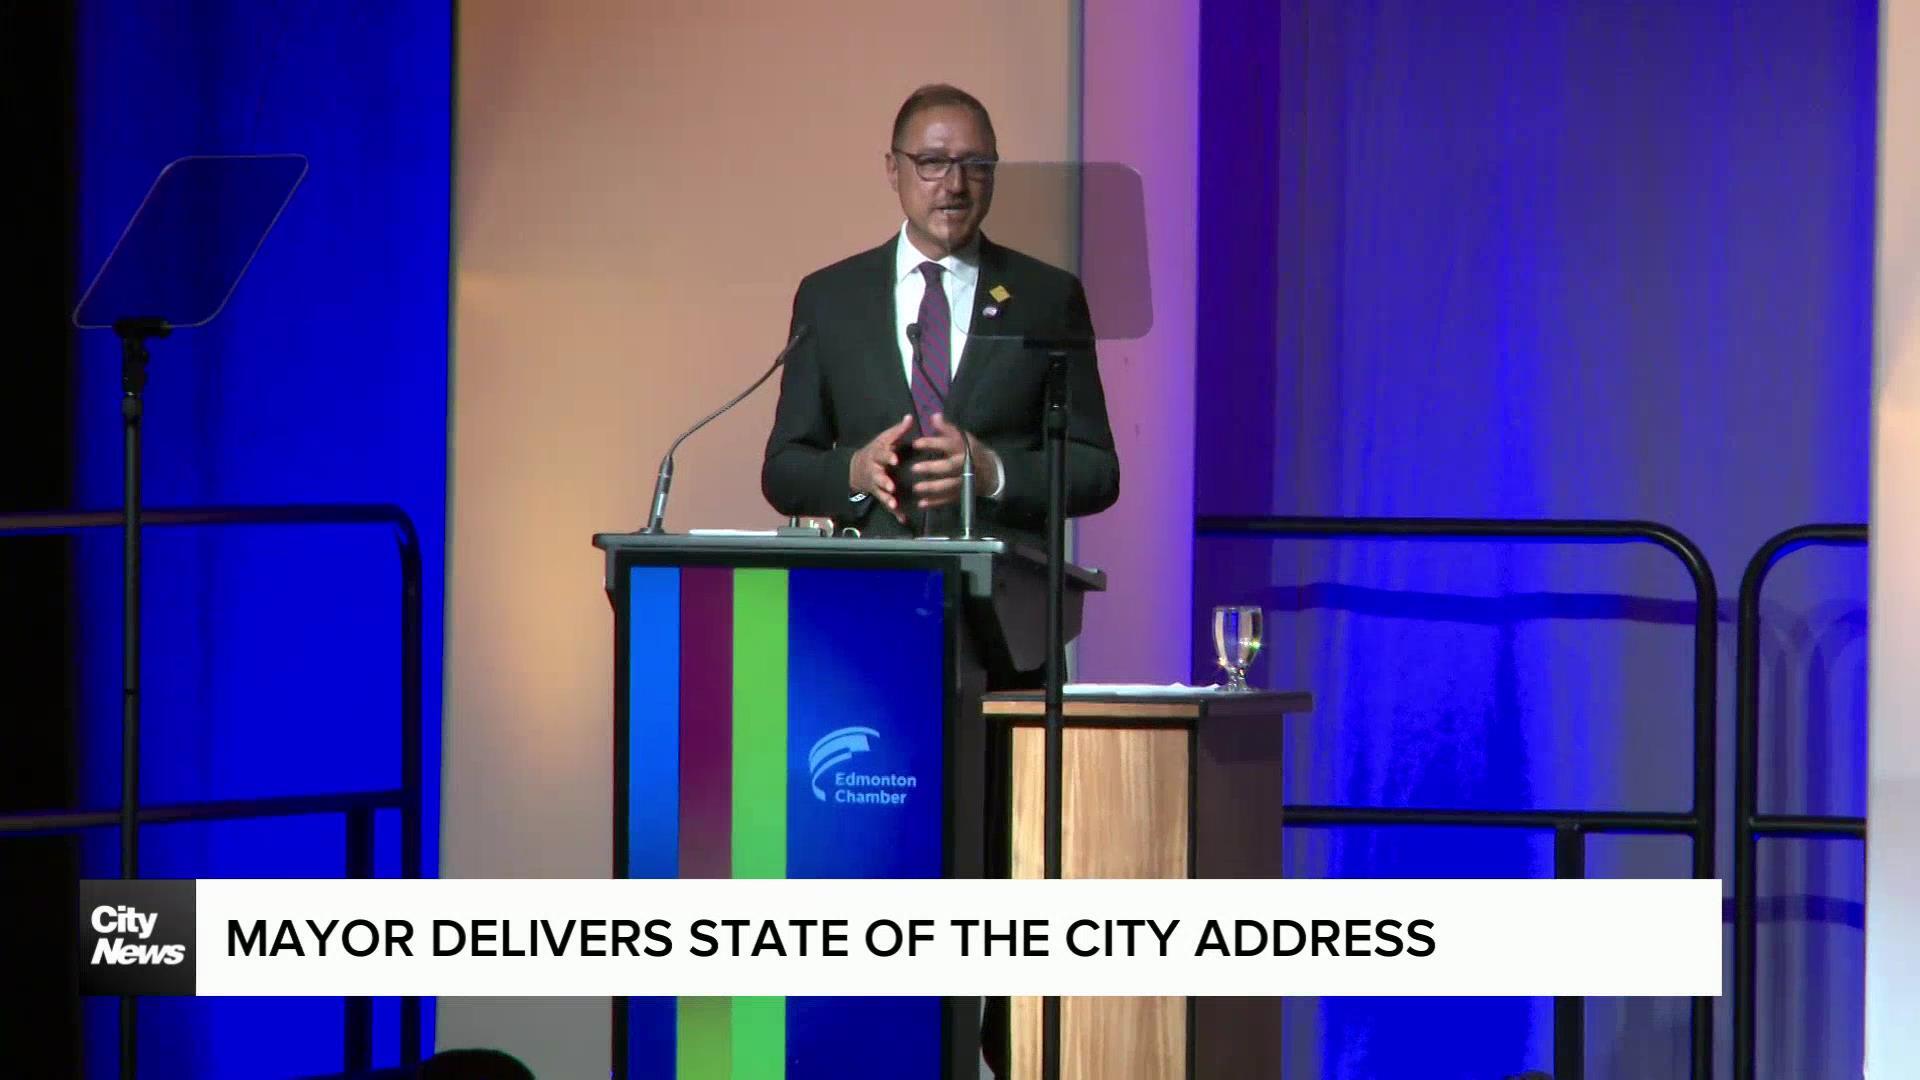 Mayor delivers state of the city address